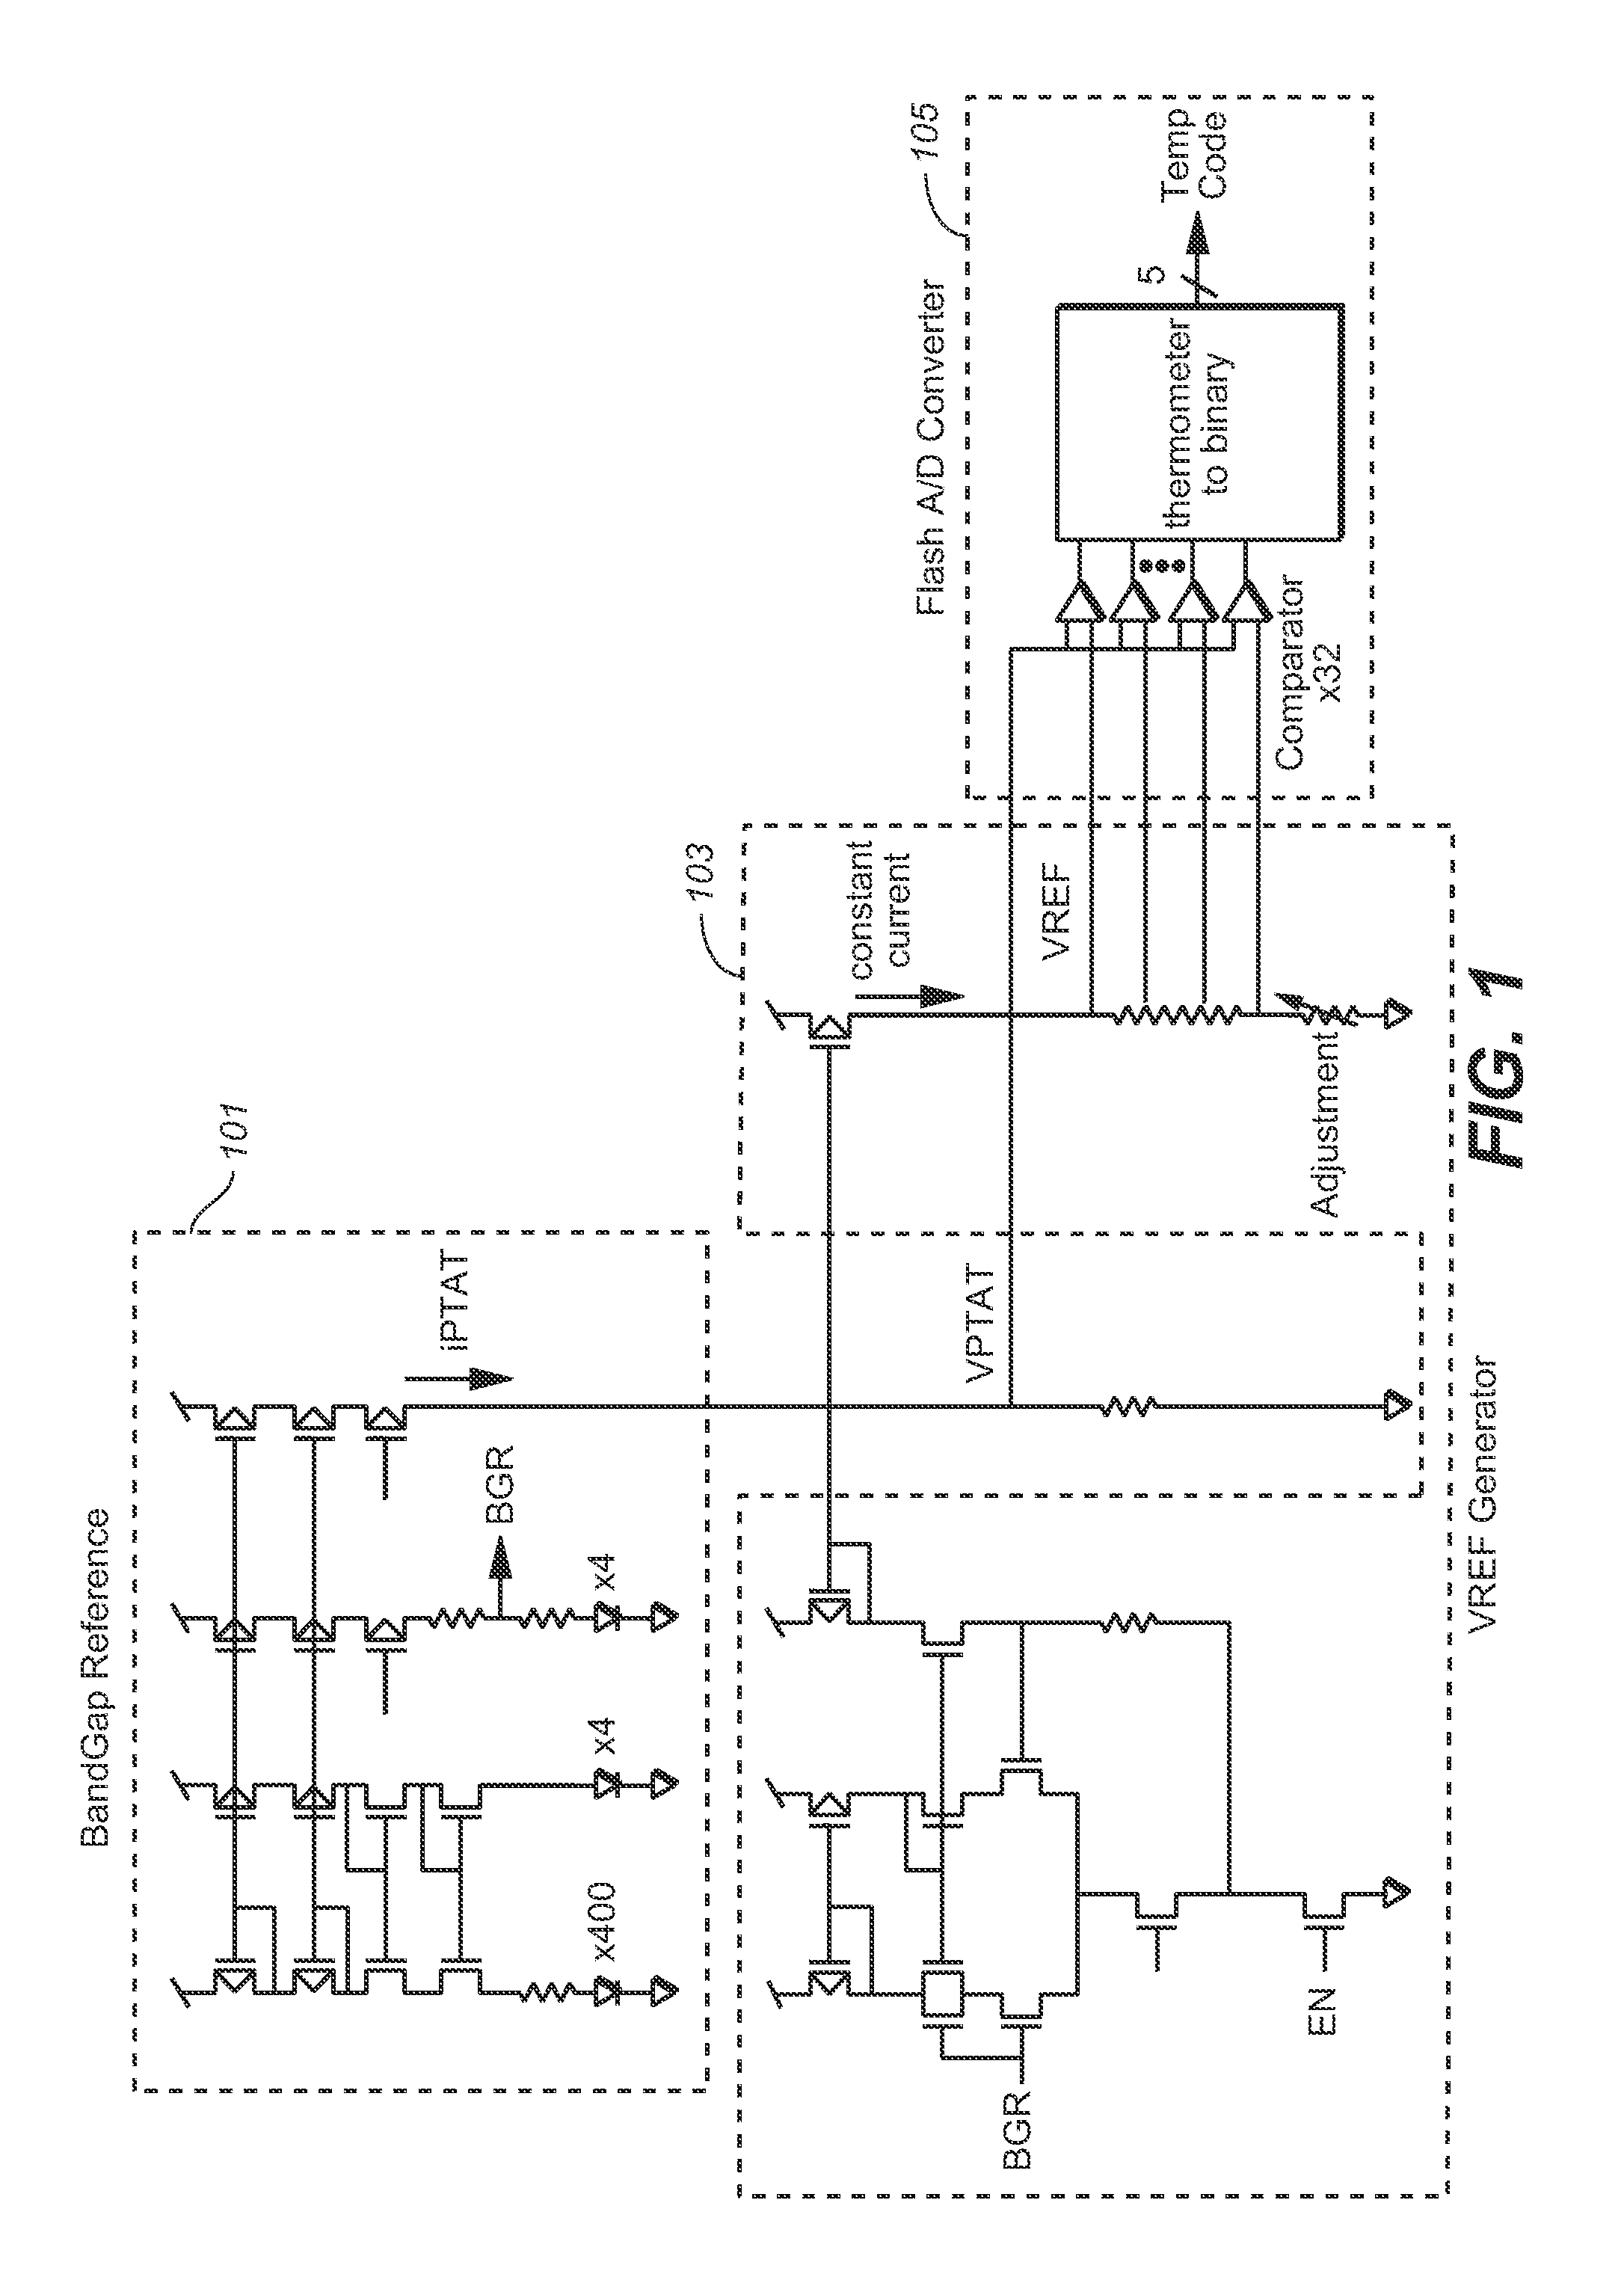 Reference Voltage Generator for Temperature Sensor with Trimming Capability at Two Temperatures